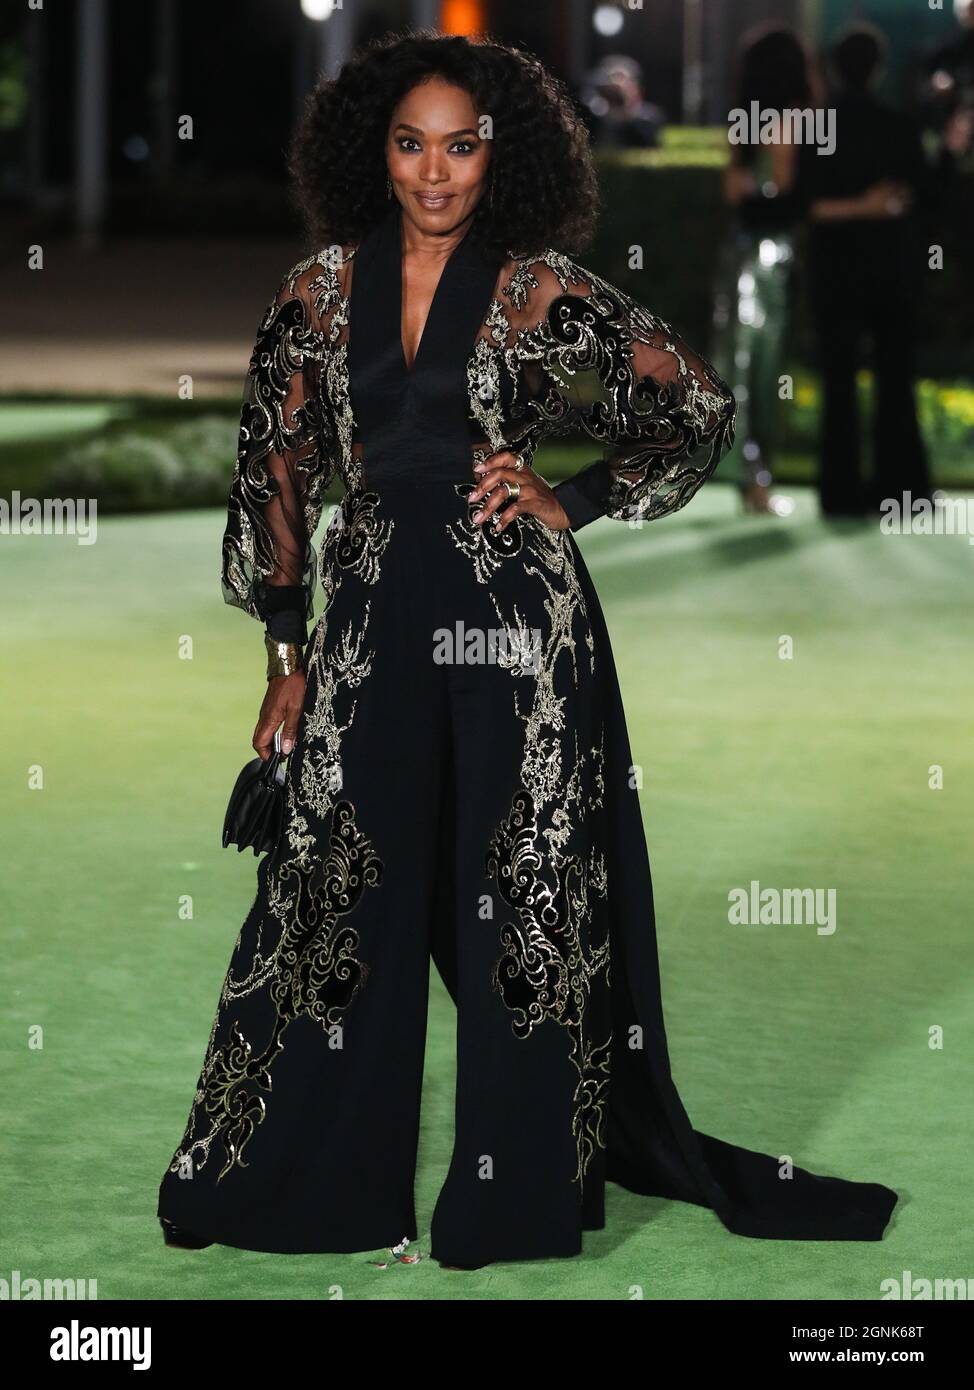 LOS ANGELES, CALIFORNIA, USA - SEPTEMBER 25: Actress Angela Bassett wearing an outfit by Elie Saab arrives at the Academy Museum of Motion Pictures Opening Gala held at the Academy Museum of Motion Pictures on September 25, 2021 in Los Angeles, California, United States. (Photo by Xavier Collin/Image Press Agency) Stock Photo